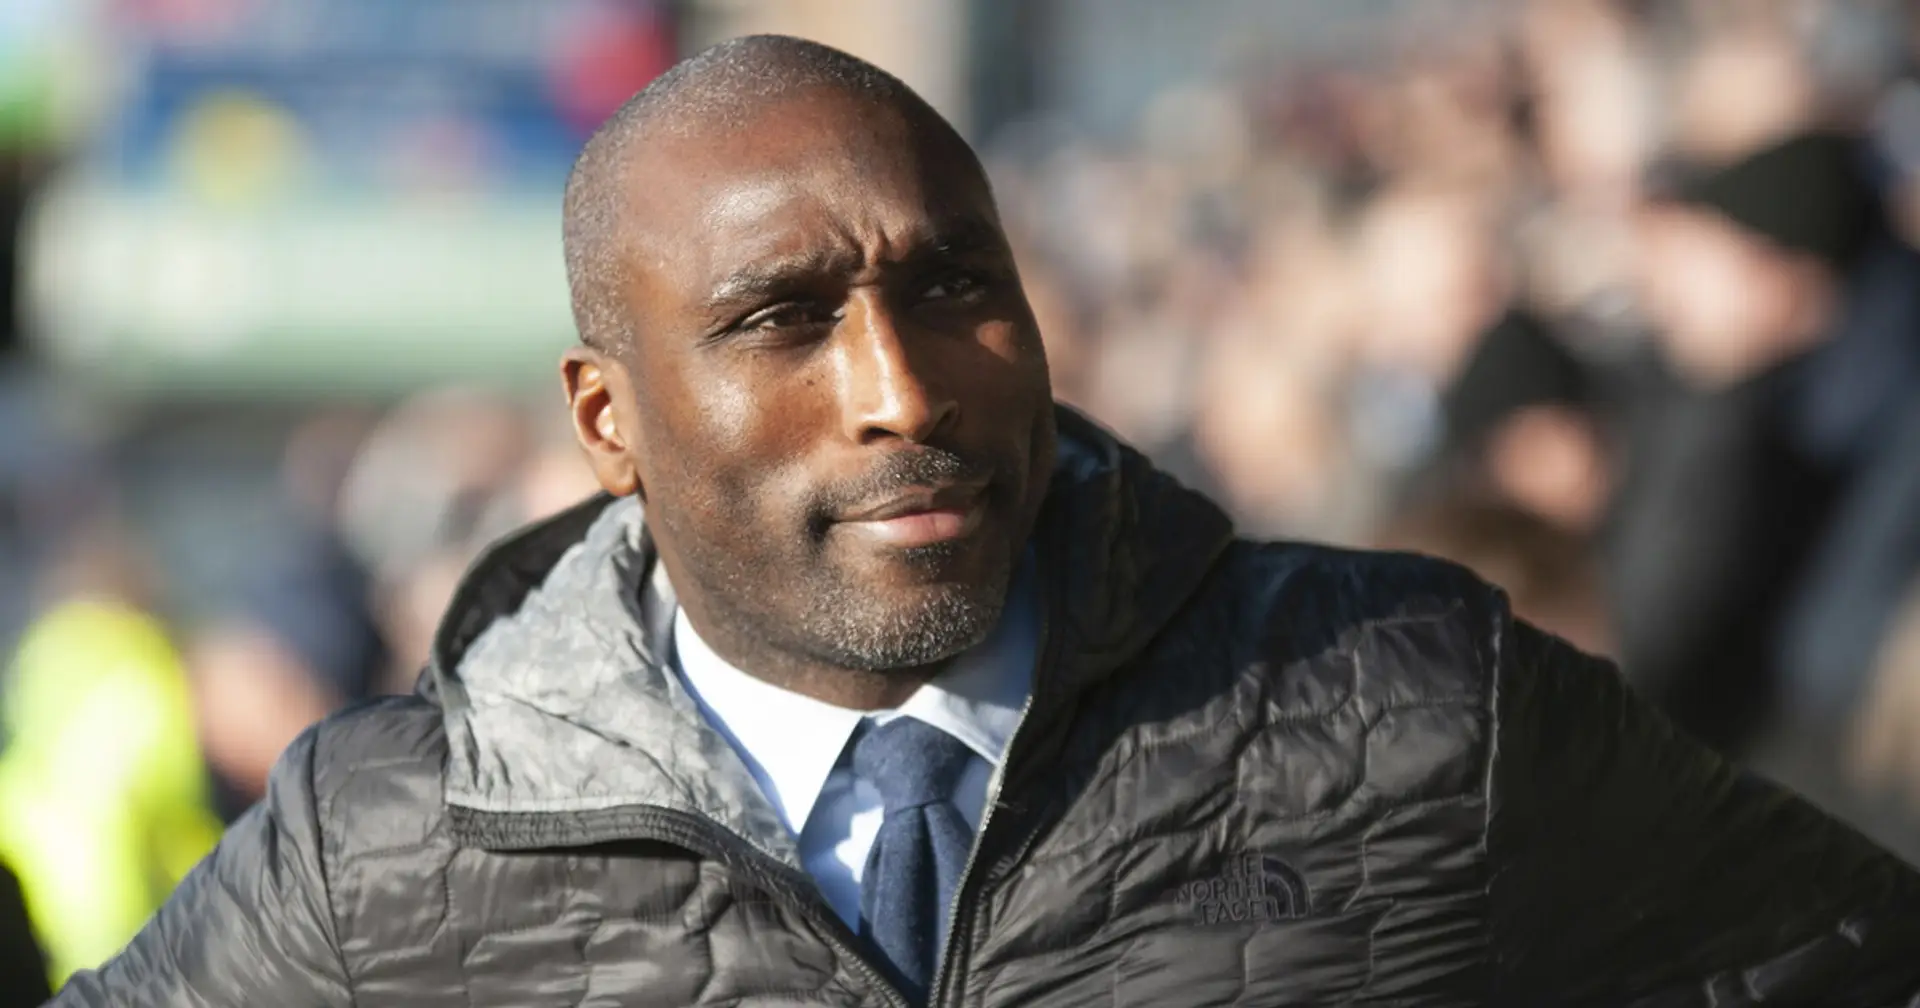 Fan offers hilarious reason why Sol Campbell should become next Sheffield Wednesday manager, Sky Sports pick it up